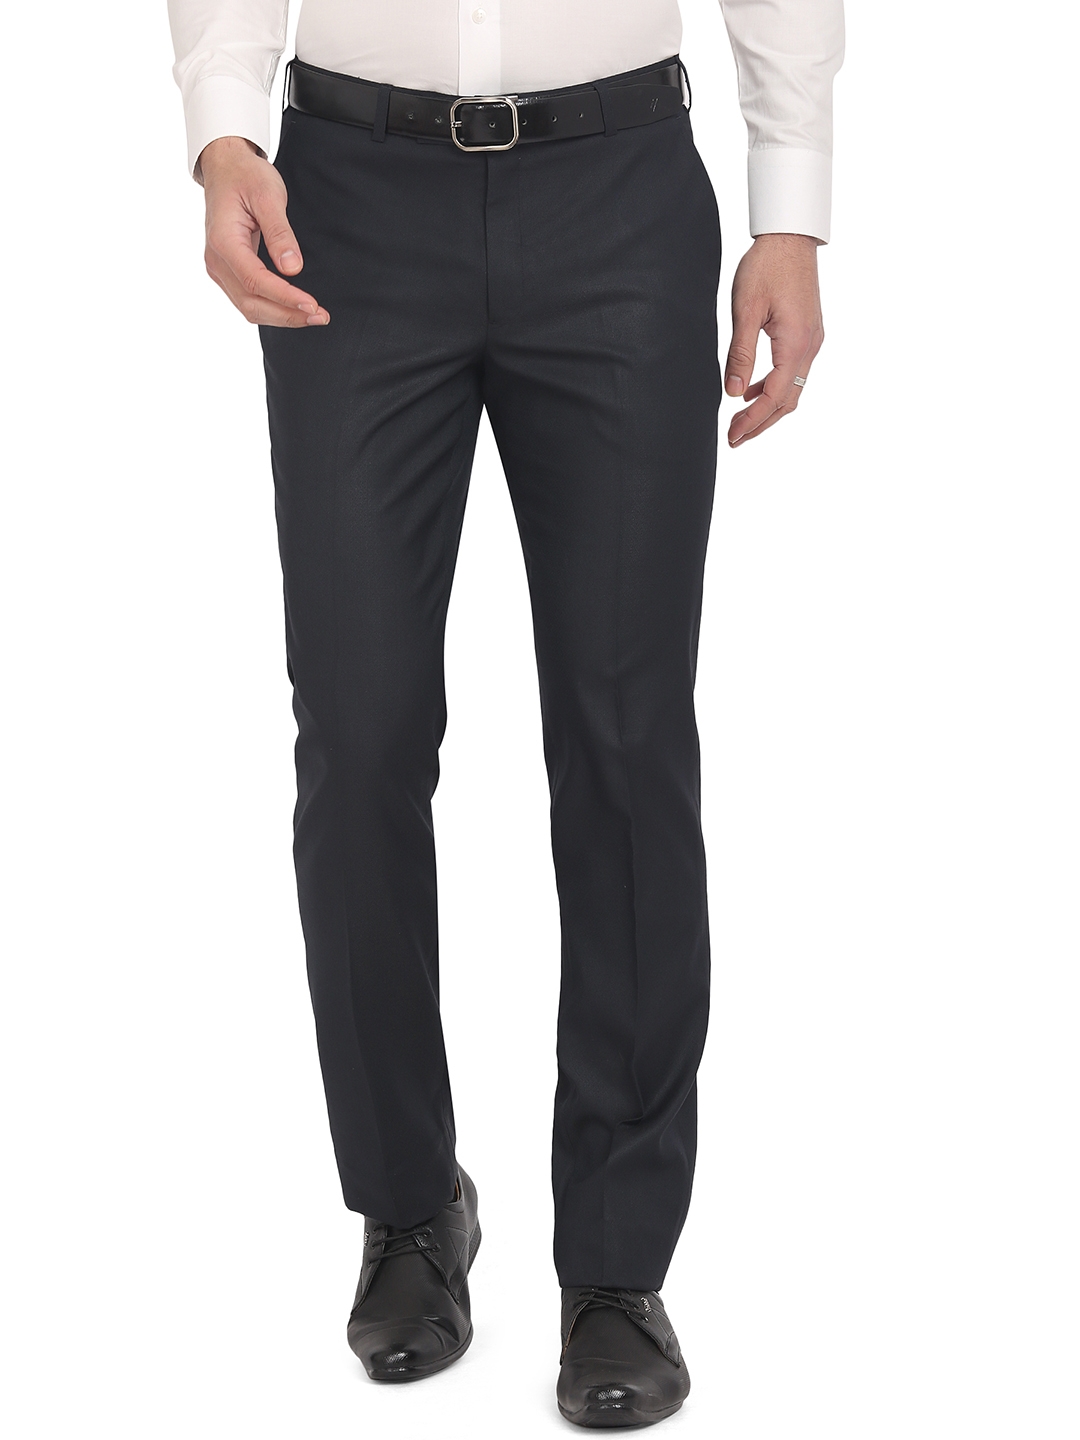 Greenfibre | Navy Blue Solid Slim Fit Formal Trouser | Greenfibre